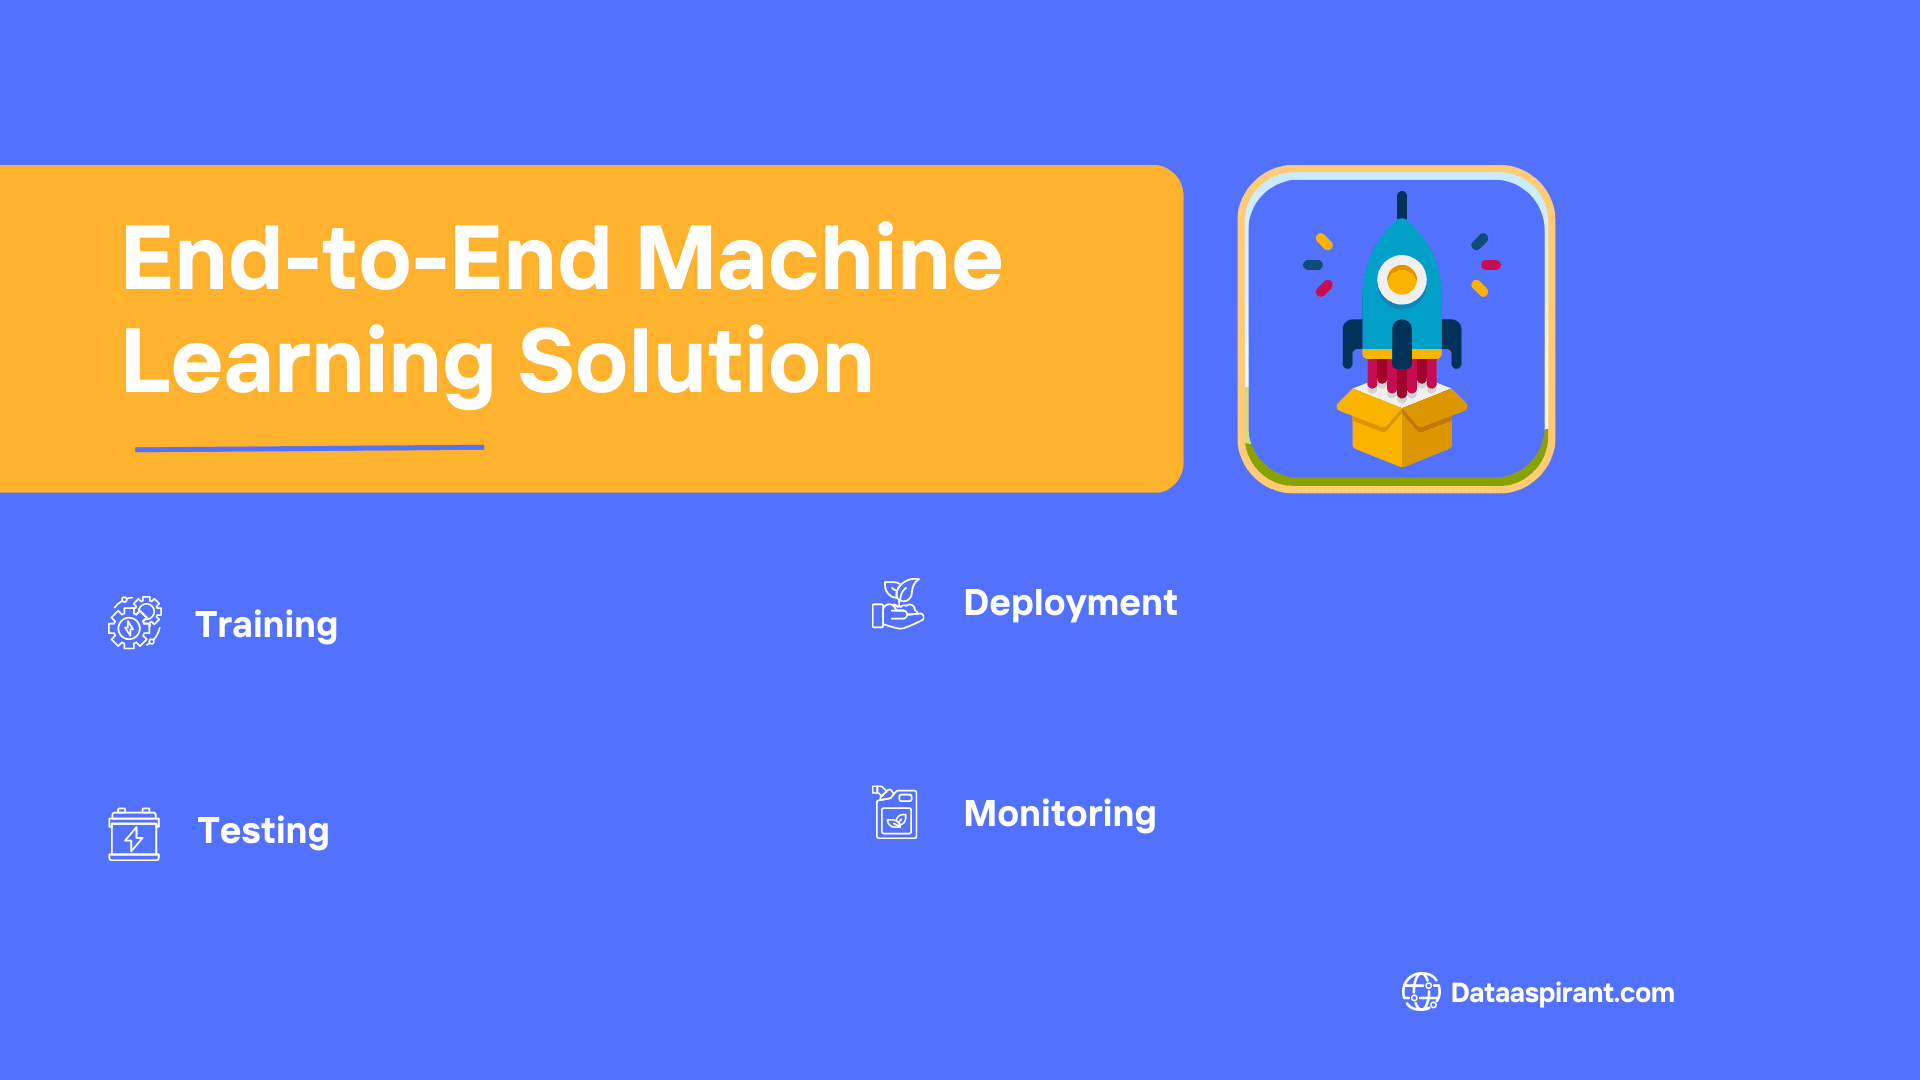 End-to-End Machine Learning Solution